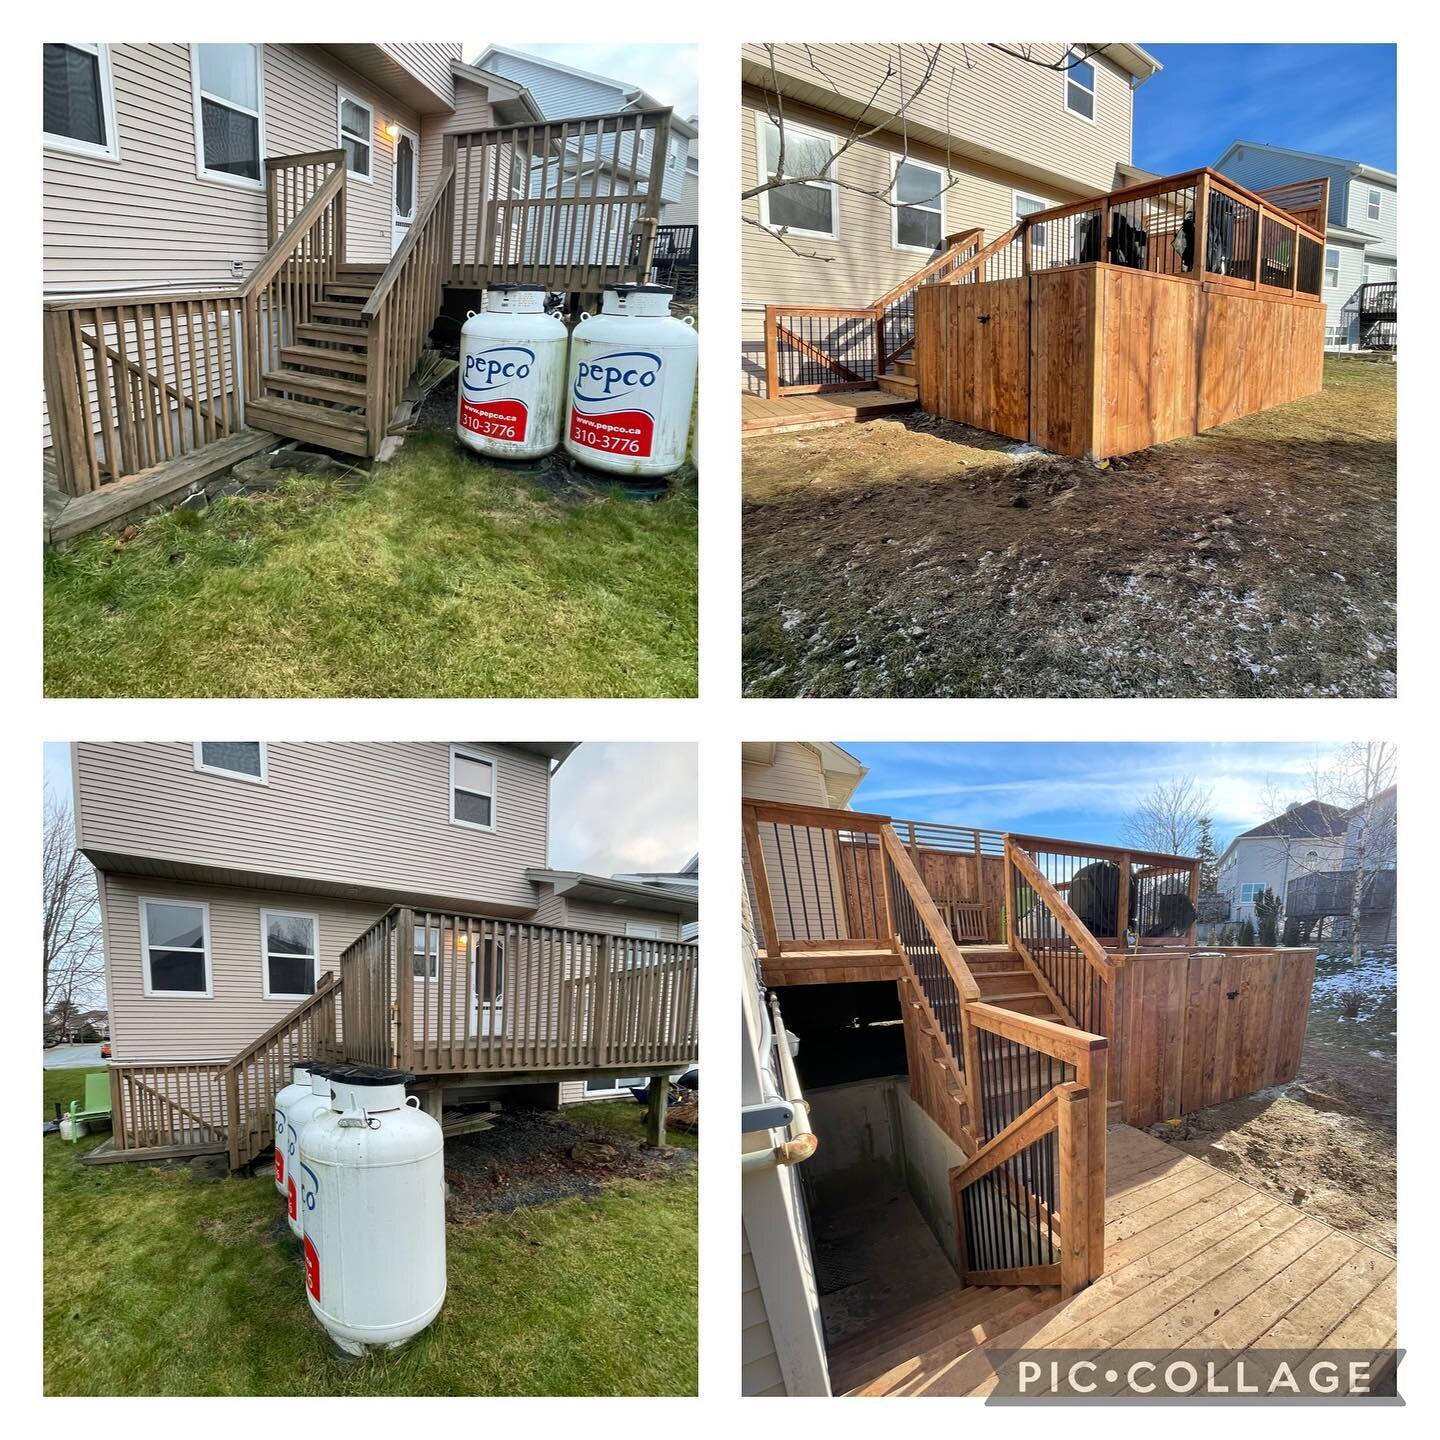 Another beautiful transformation on this deck project in Halifax. 
#blueridgebuilders #customdeck #wooddeck #privacyfence #carpentry #halifaxcontractor #halifax #dartmouth #bedford #fallriver